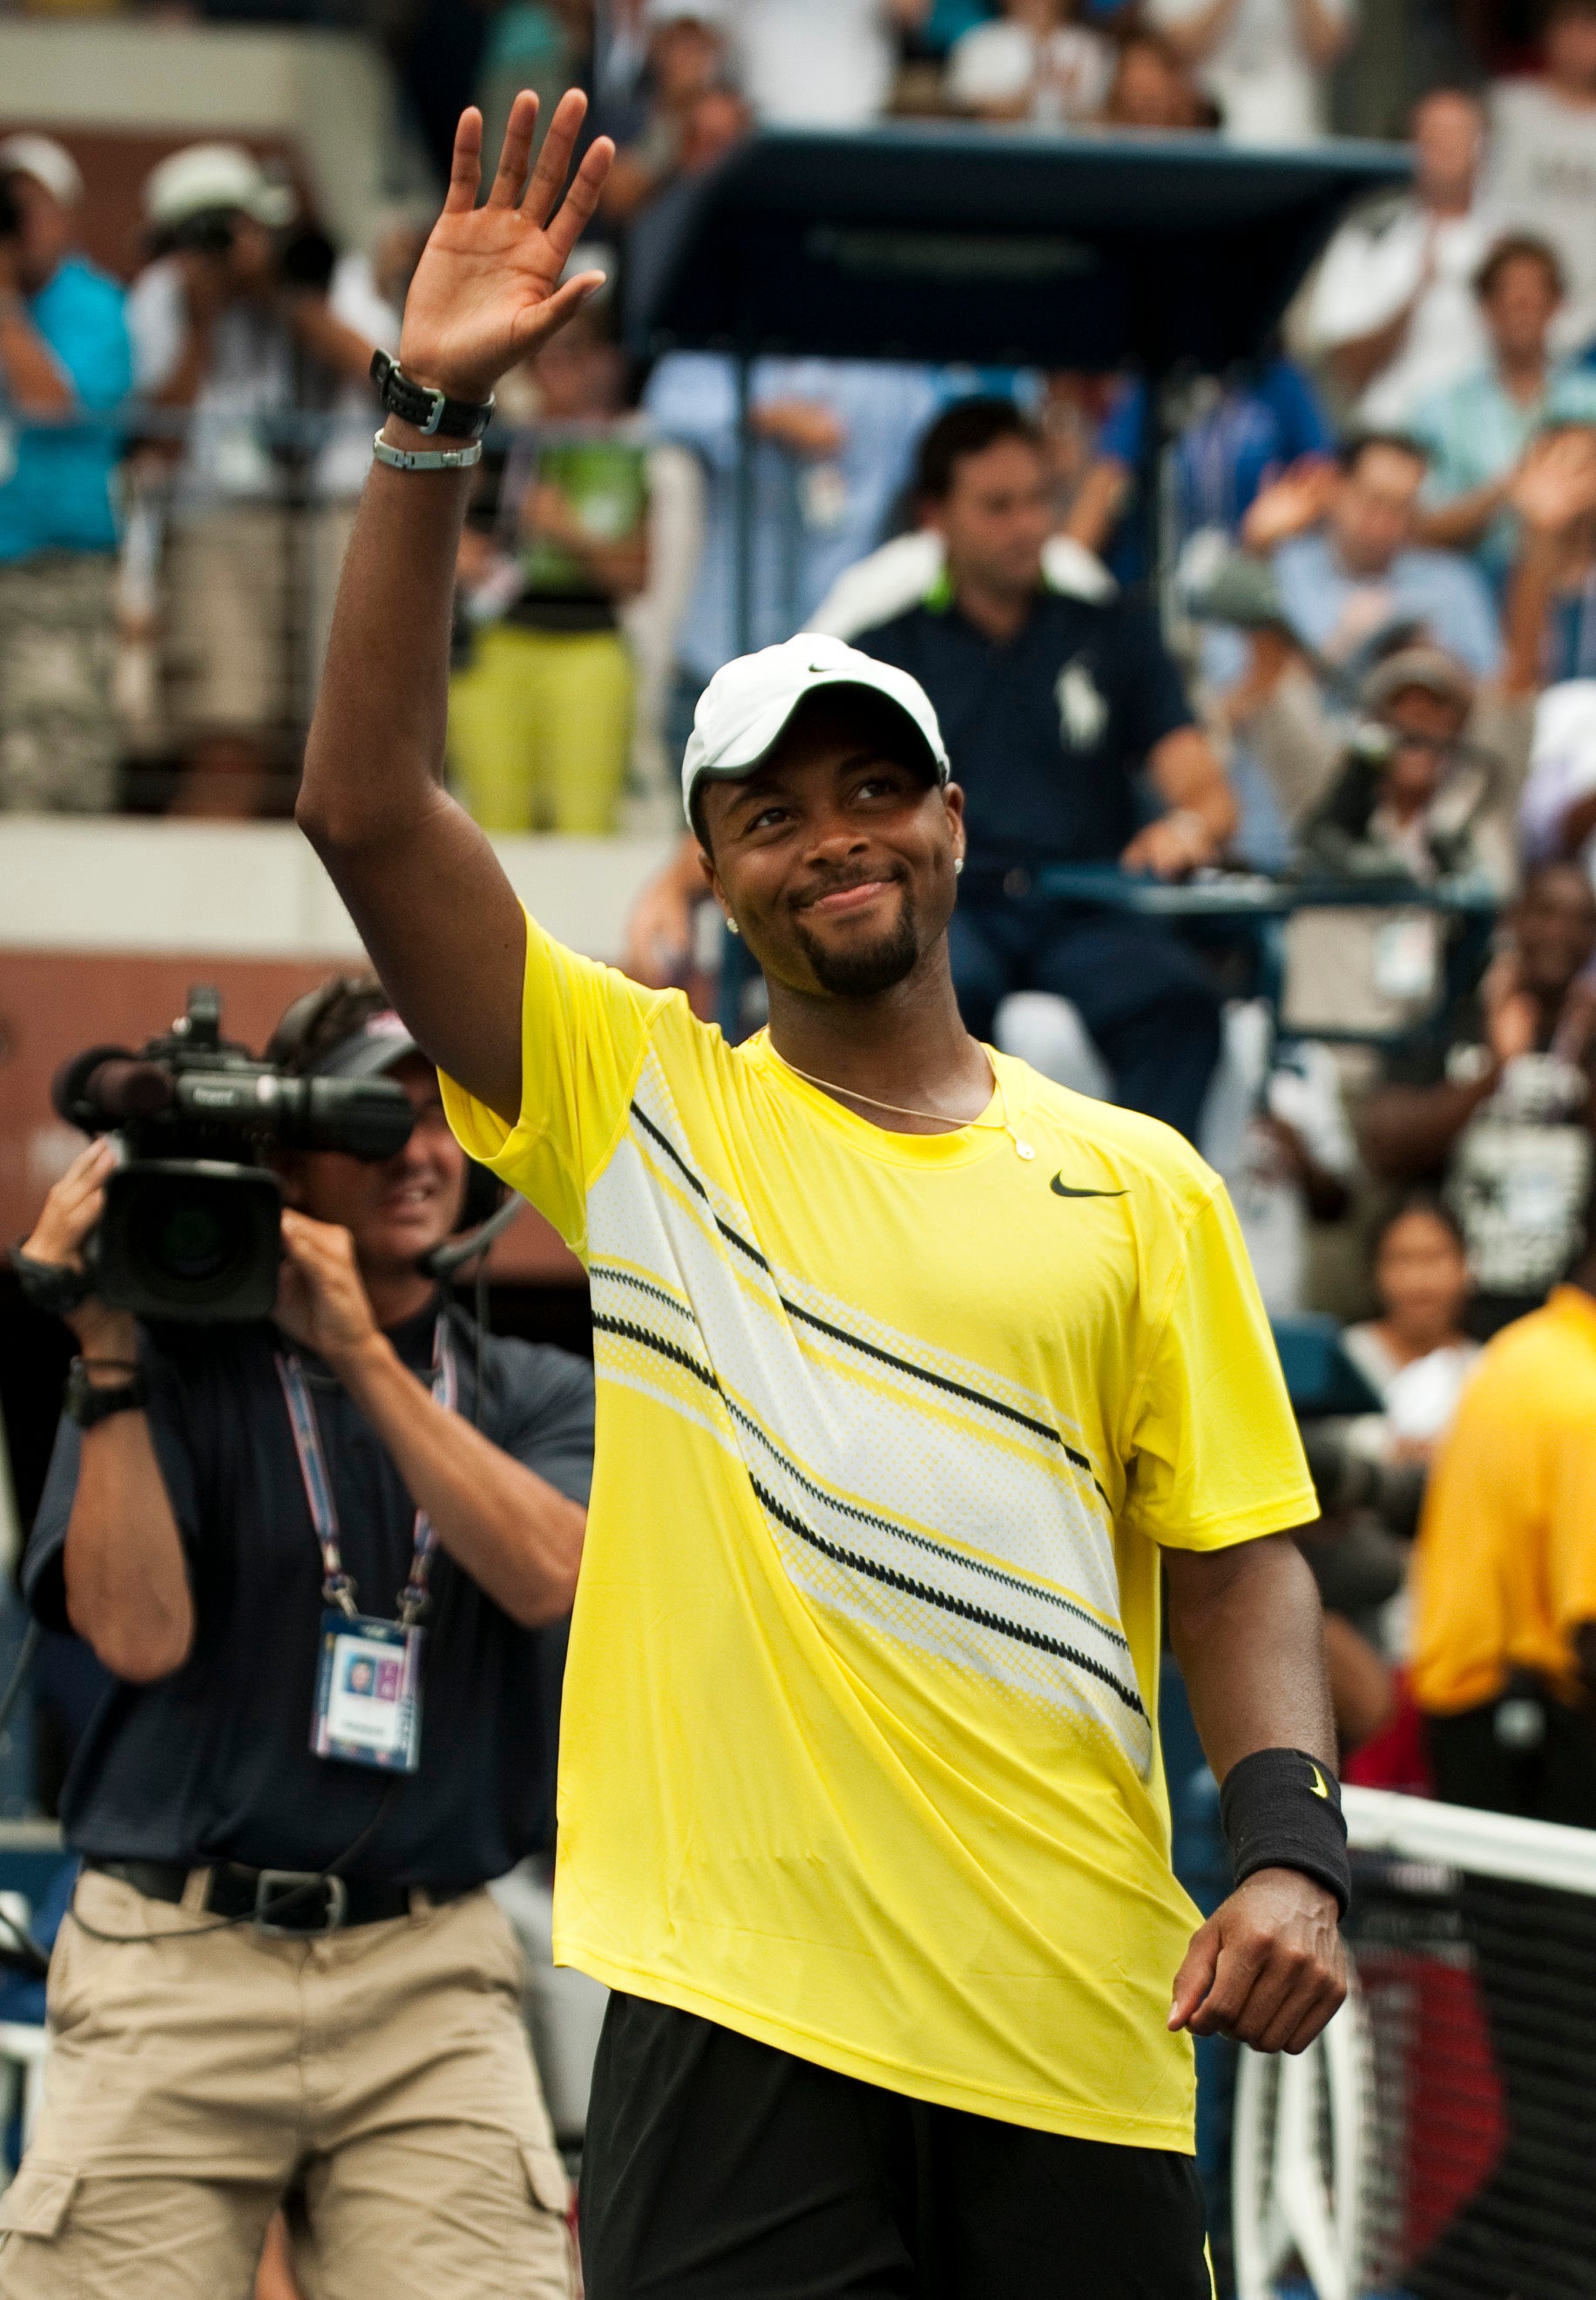 Donald Young Takes Down Grand Slam